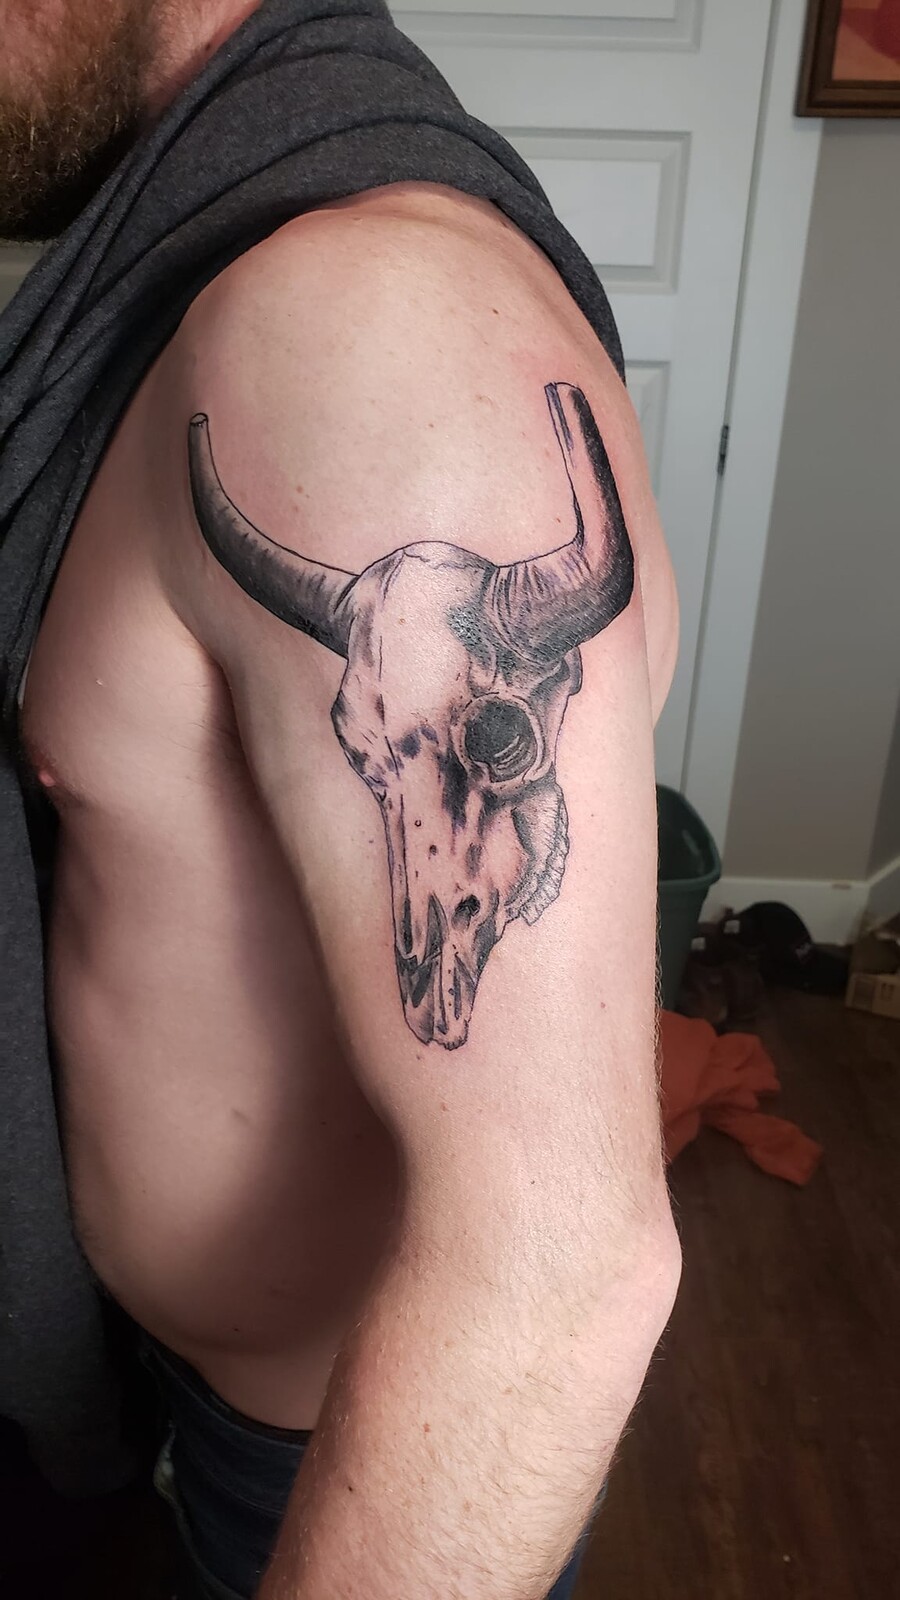 His first tattoo with me of the cow skull.